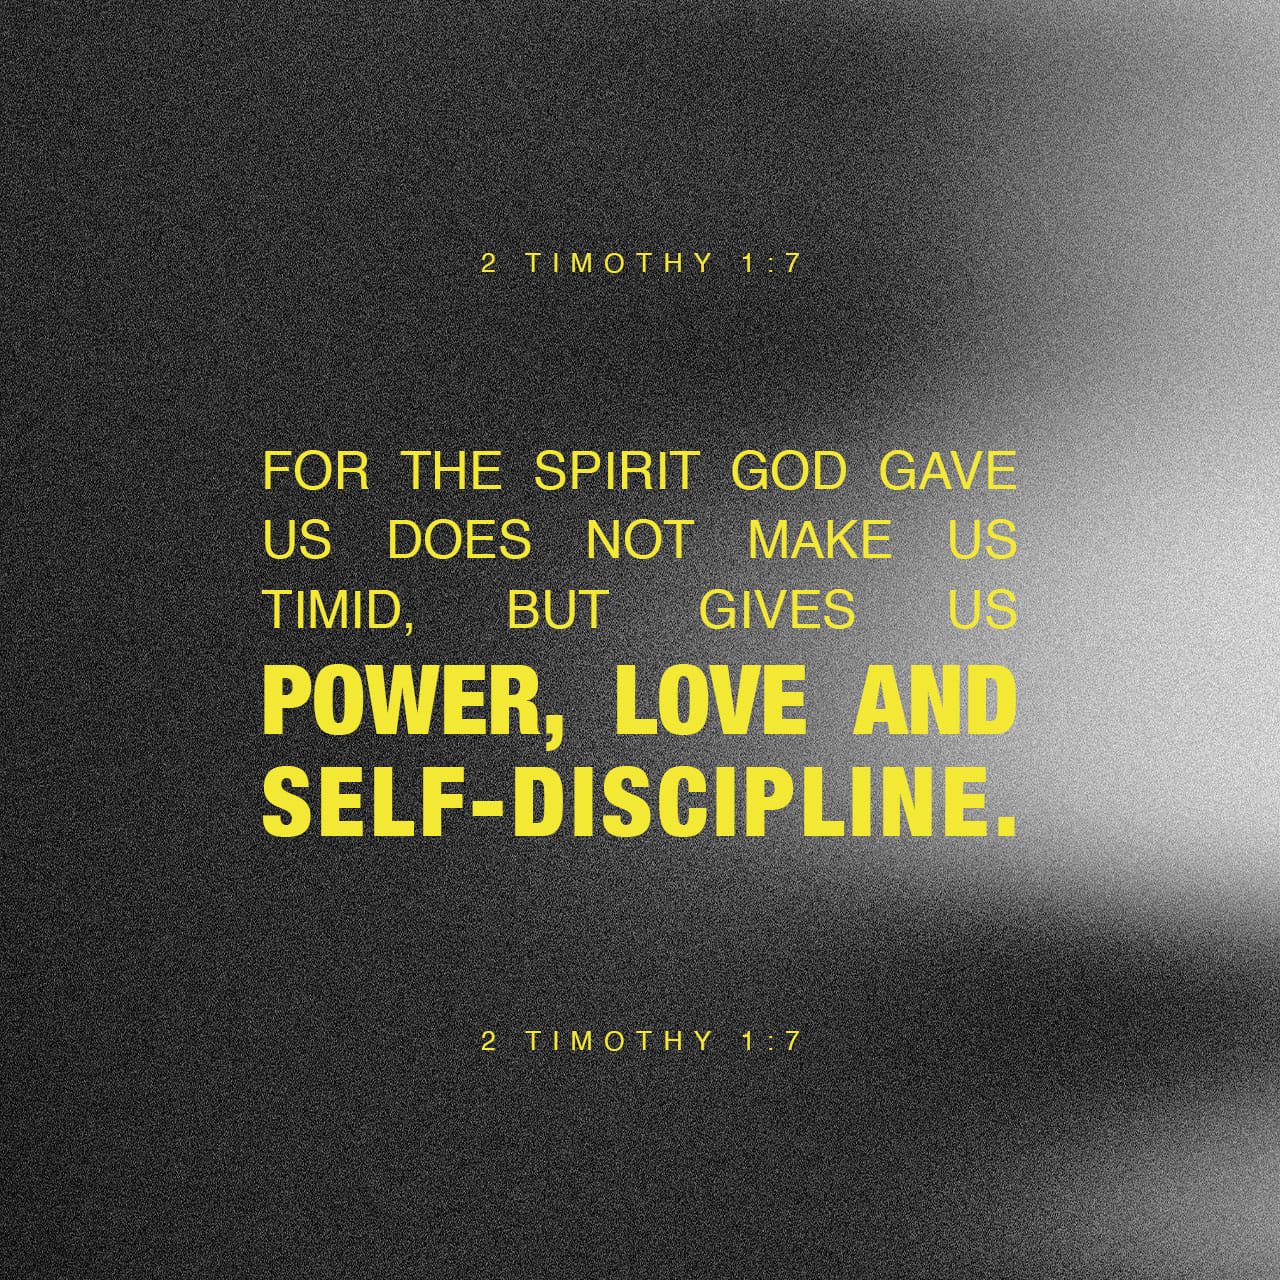 2 Timothy 1:7 For God hath not given us the spirit of fear; but of power, and of love, and of a sound mind. | King James Version (KJV) | Download The Bible App Now